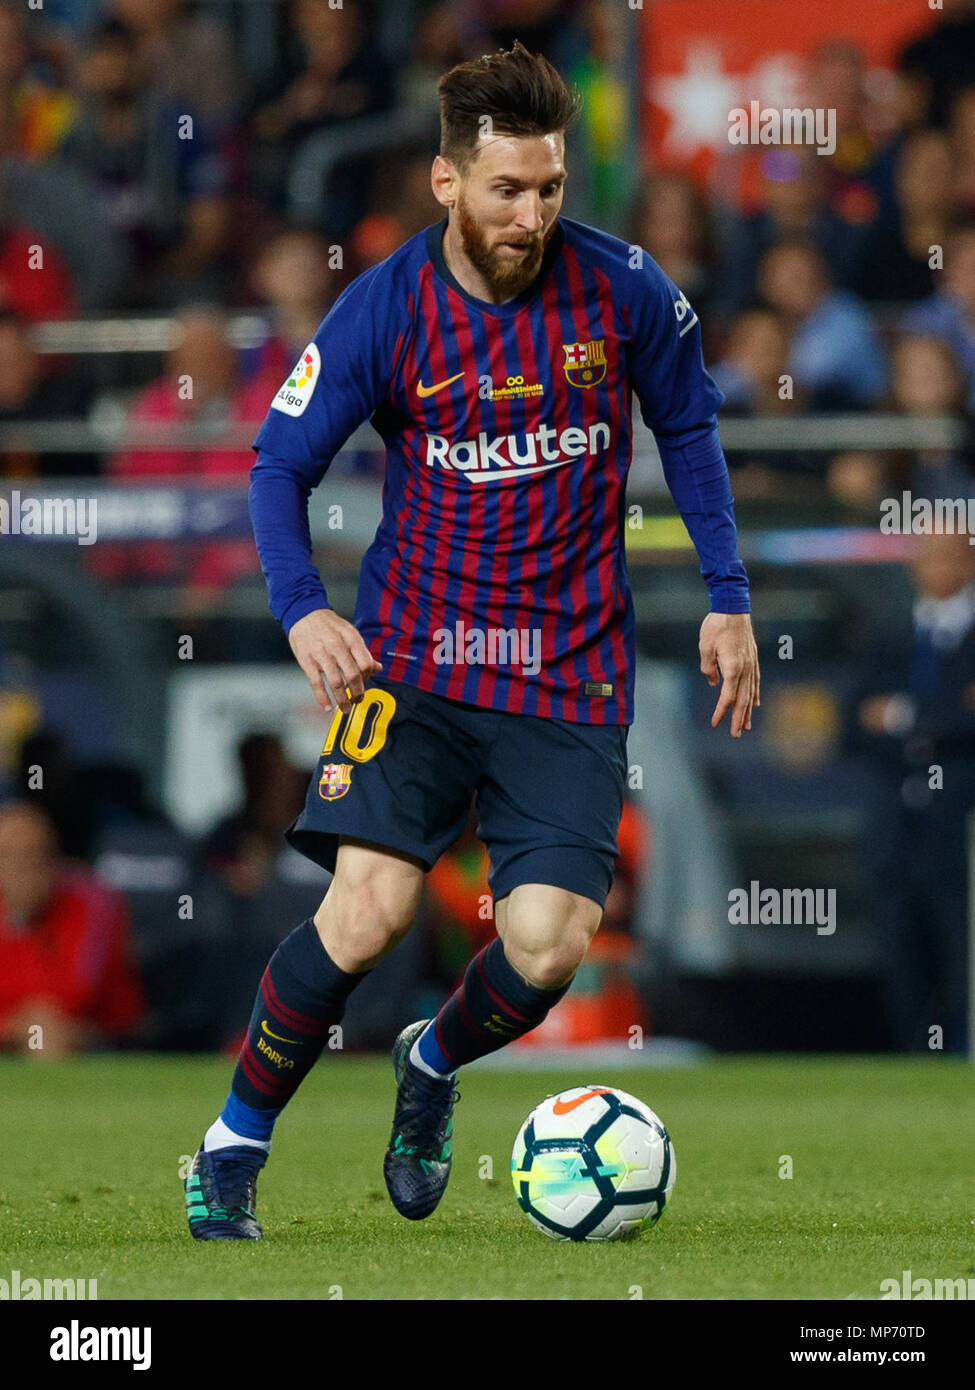 Barcelona, 20th May: Lionel Messi of FC Barcelona in action during the 2017/ 2018 LaLiga Santander Round 38 game between FC Barcelona and Real Sociedad  at Camp Nou on May 20, 2018 in